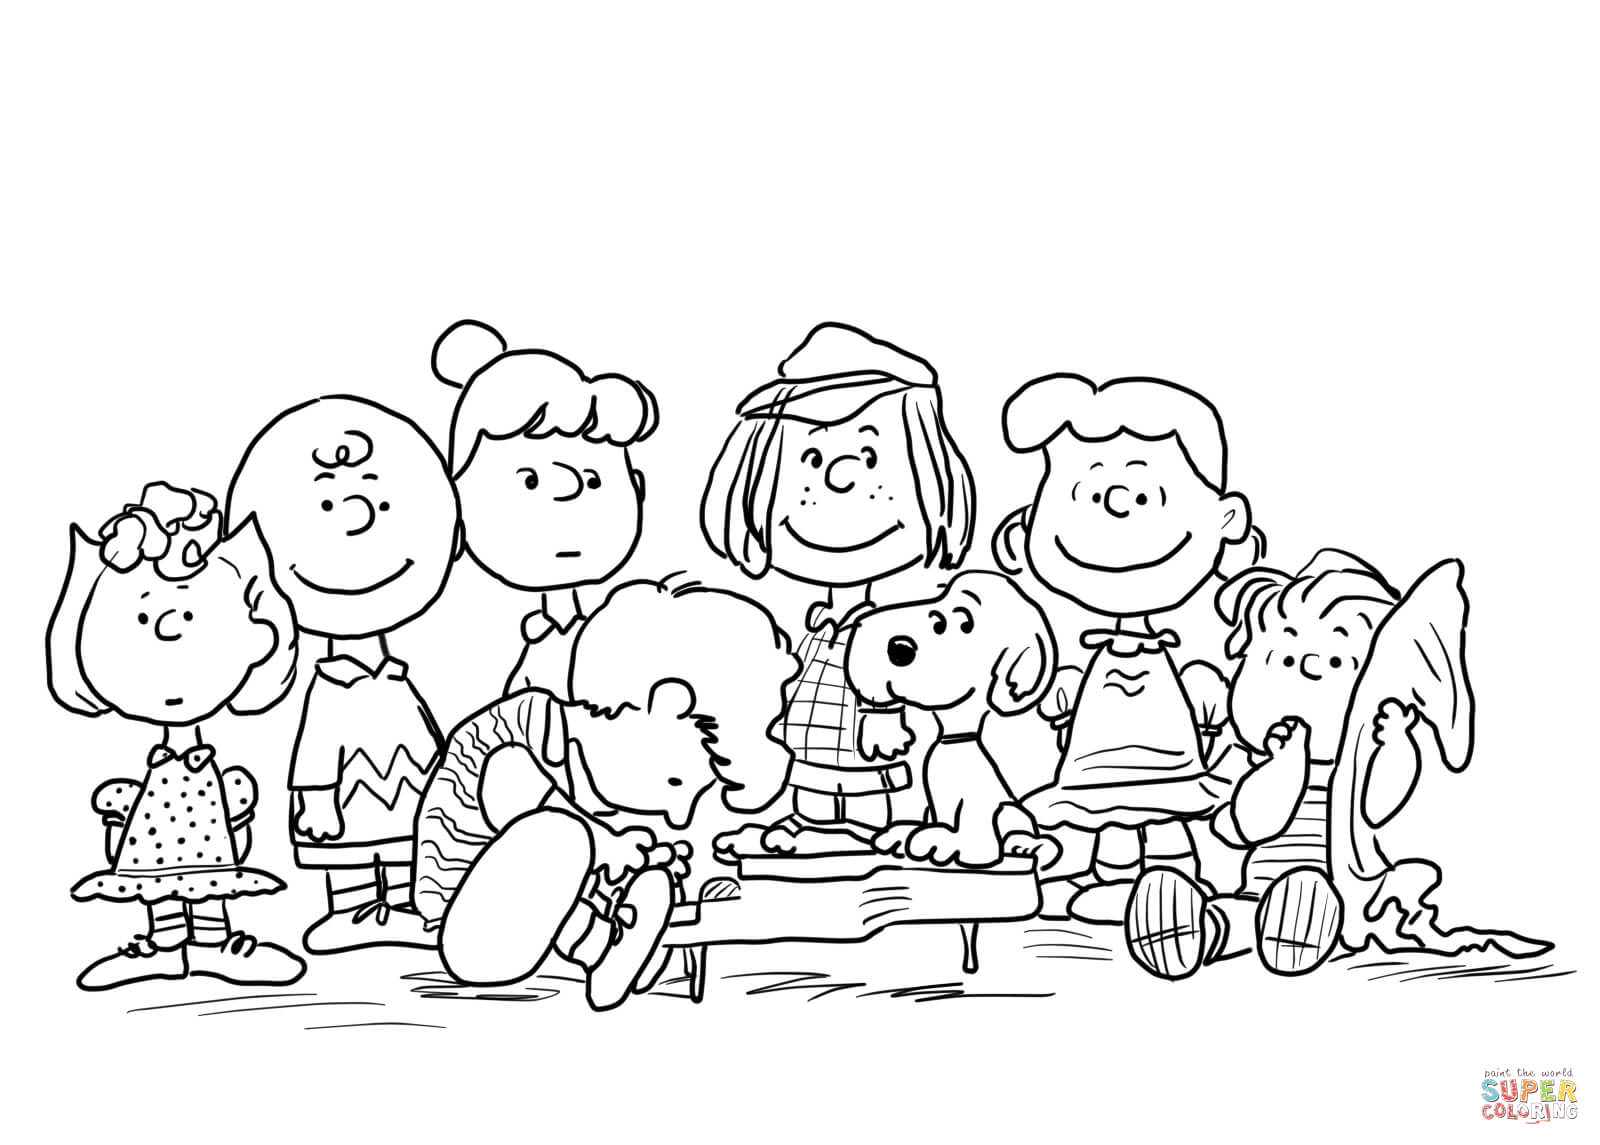 Charlie Brown Characters Coloring Pages - Coloring Home